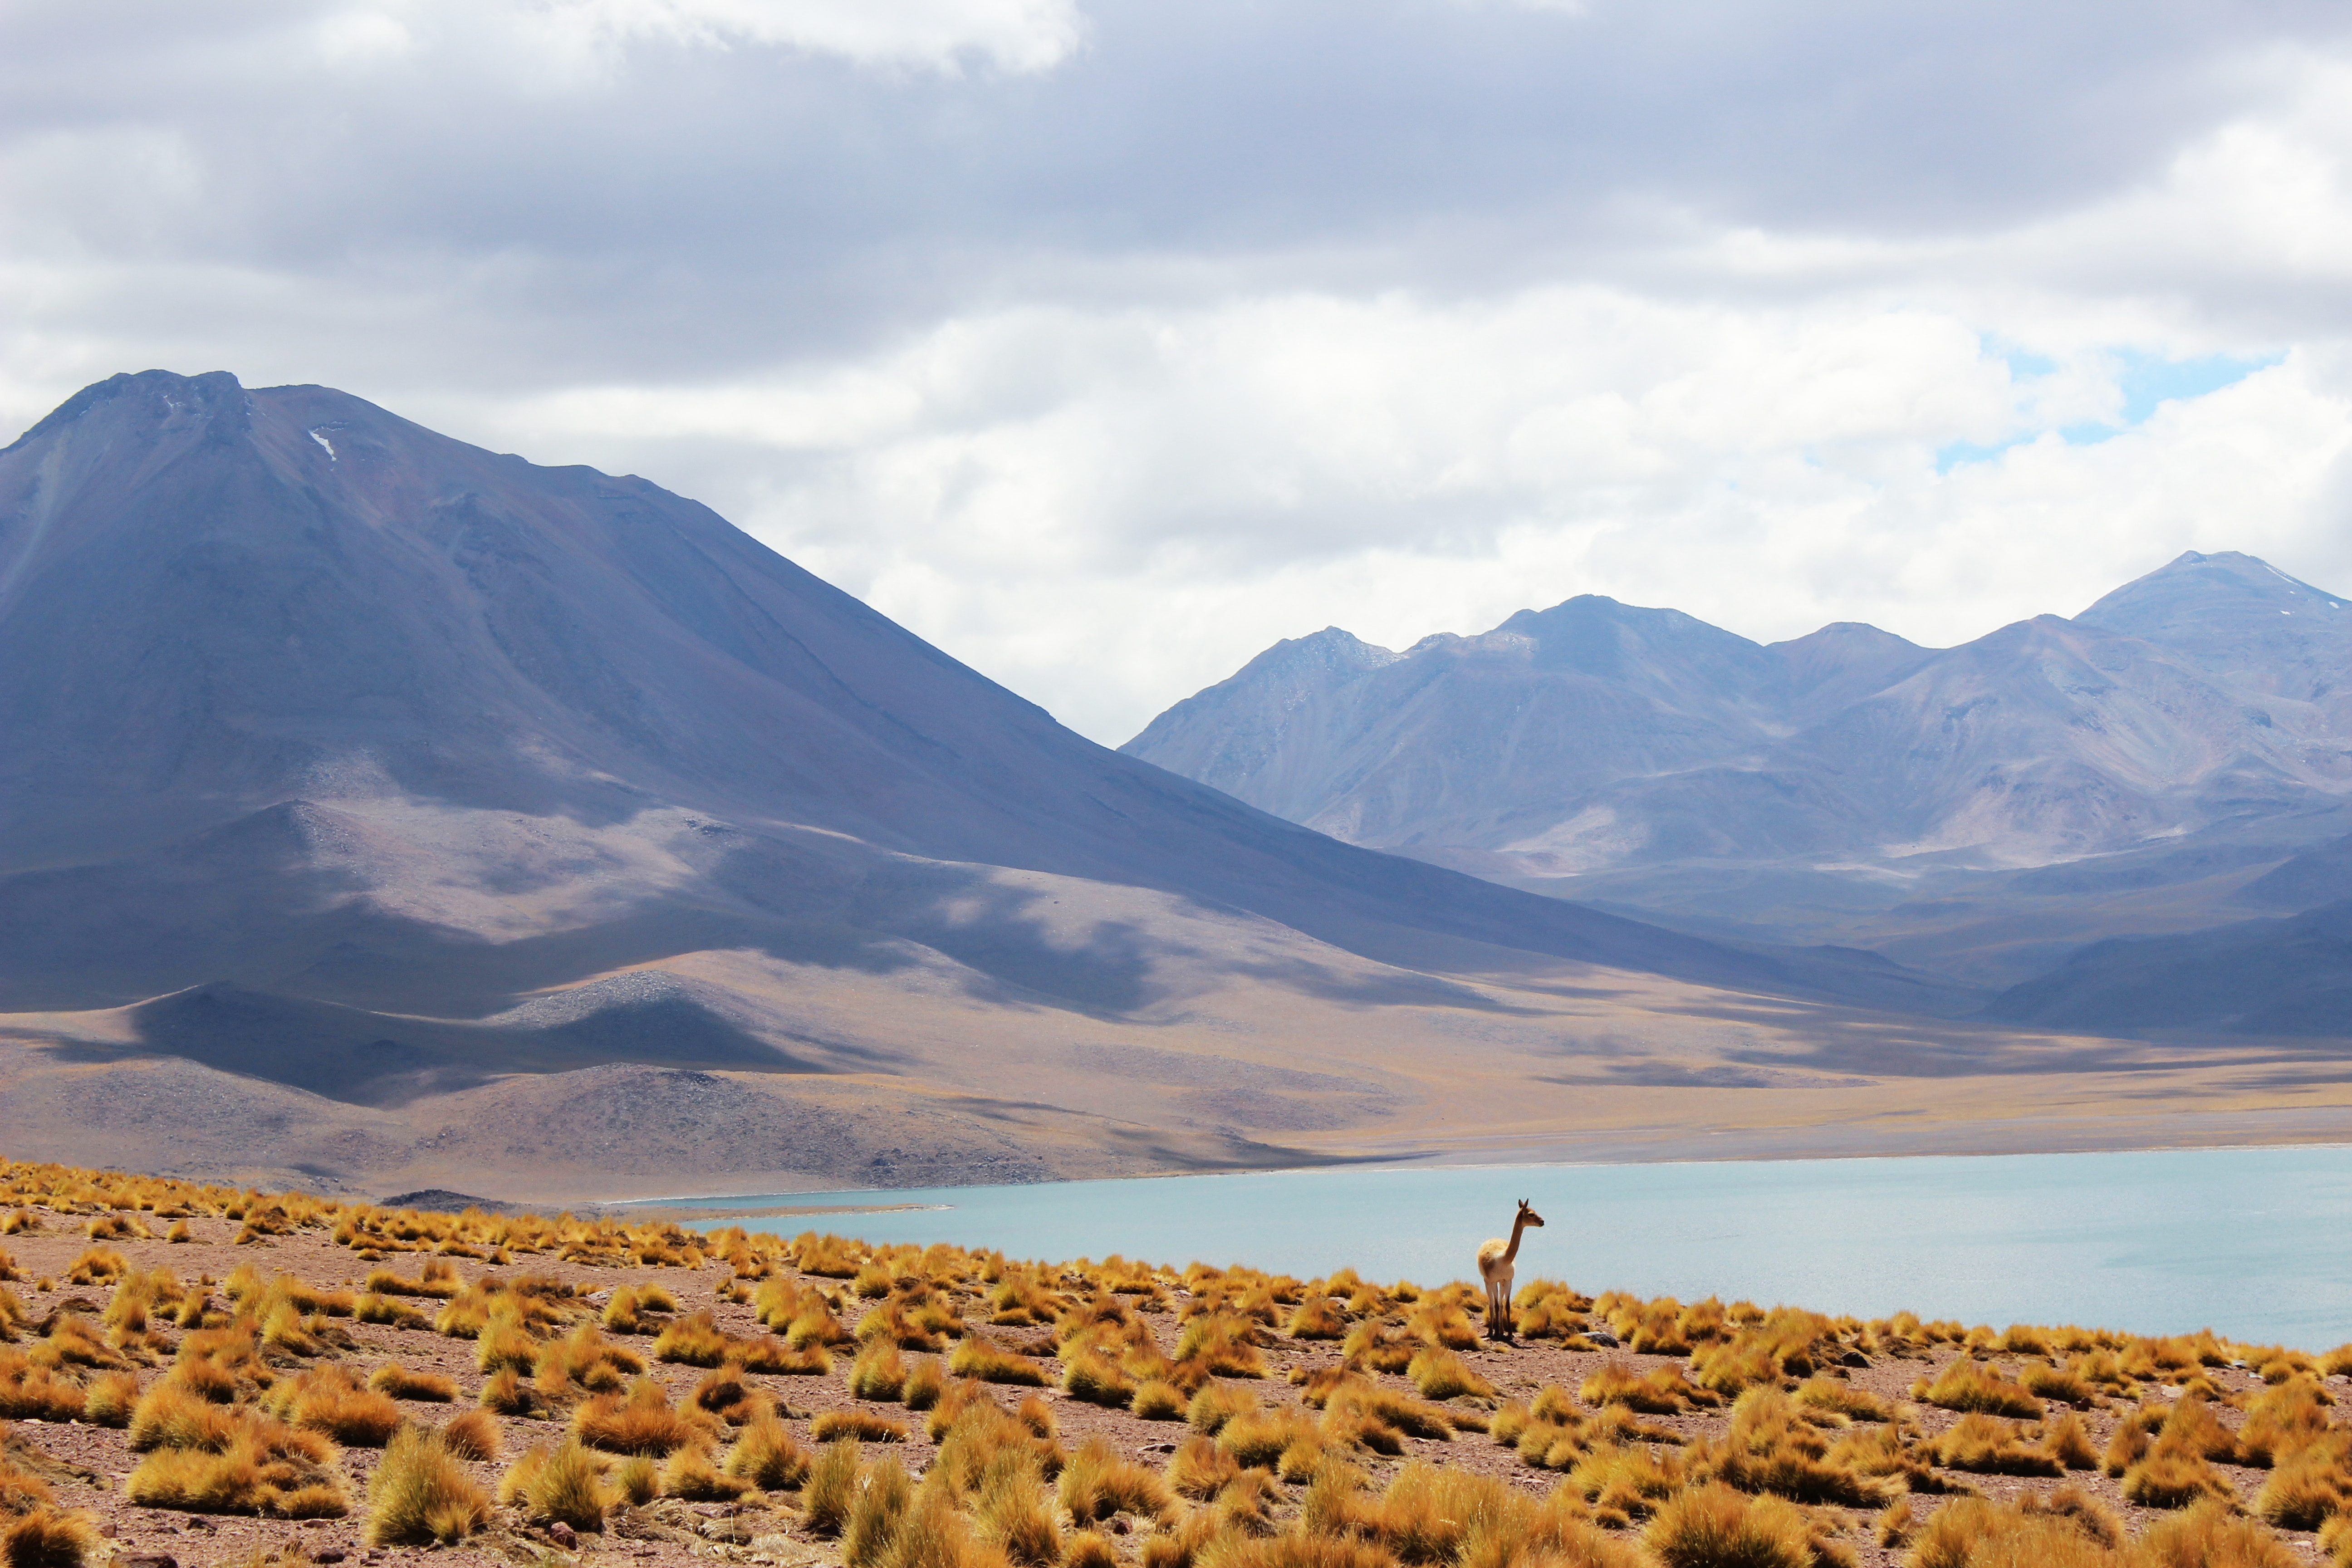 A small deer or antelope stands on a shrubby hillside in the Atacama Desert, next to a lake.